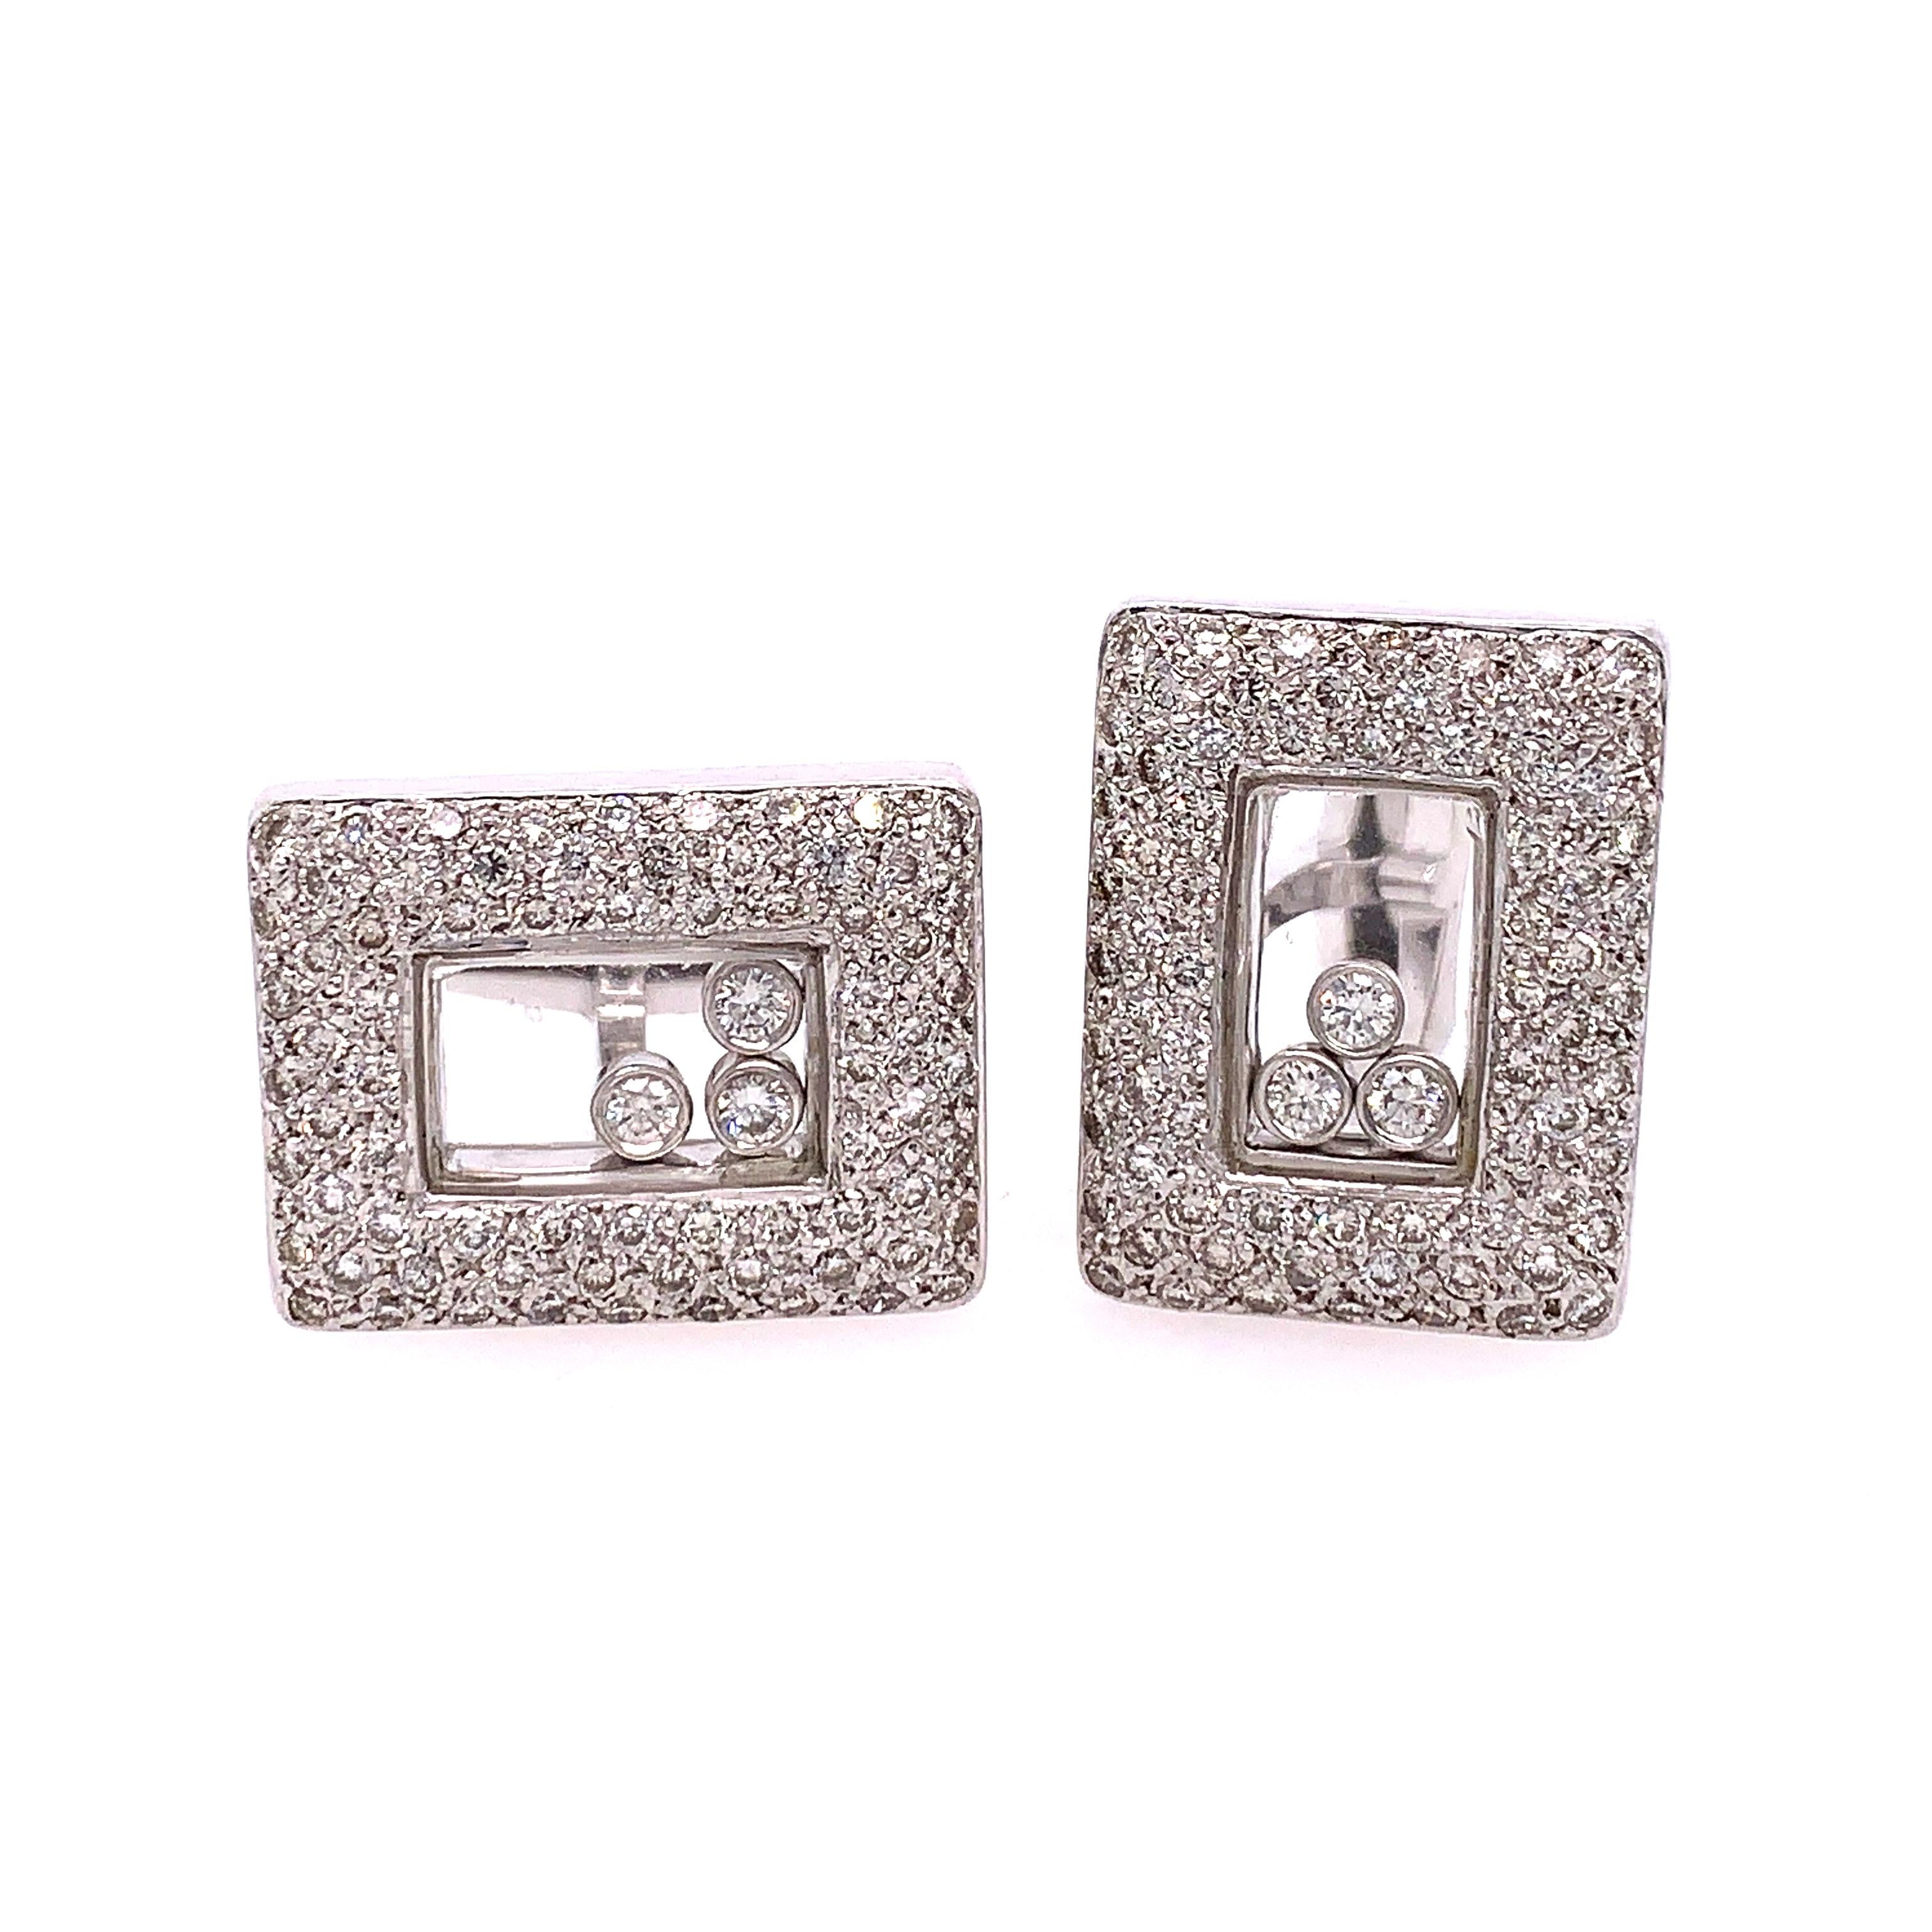 These fun and elegant Cufflinks contain approximately 1.55 Carats of diamonds as well as 3 floating diamonds in the center. set in 18k white gold.

The spectacular movement make a great conversational piece!
